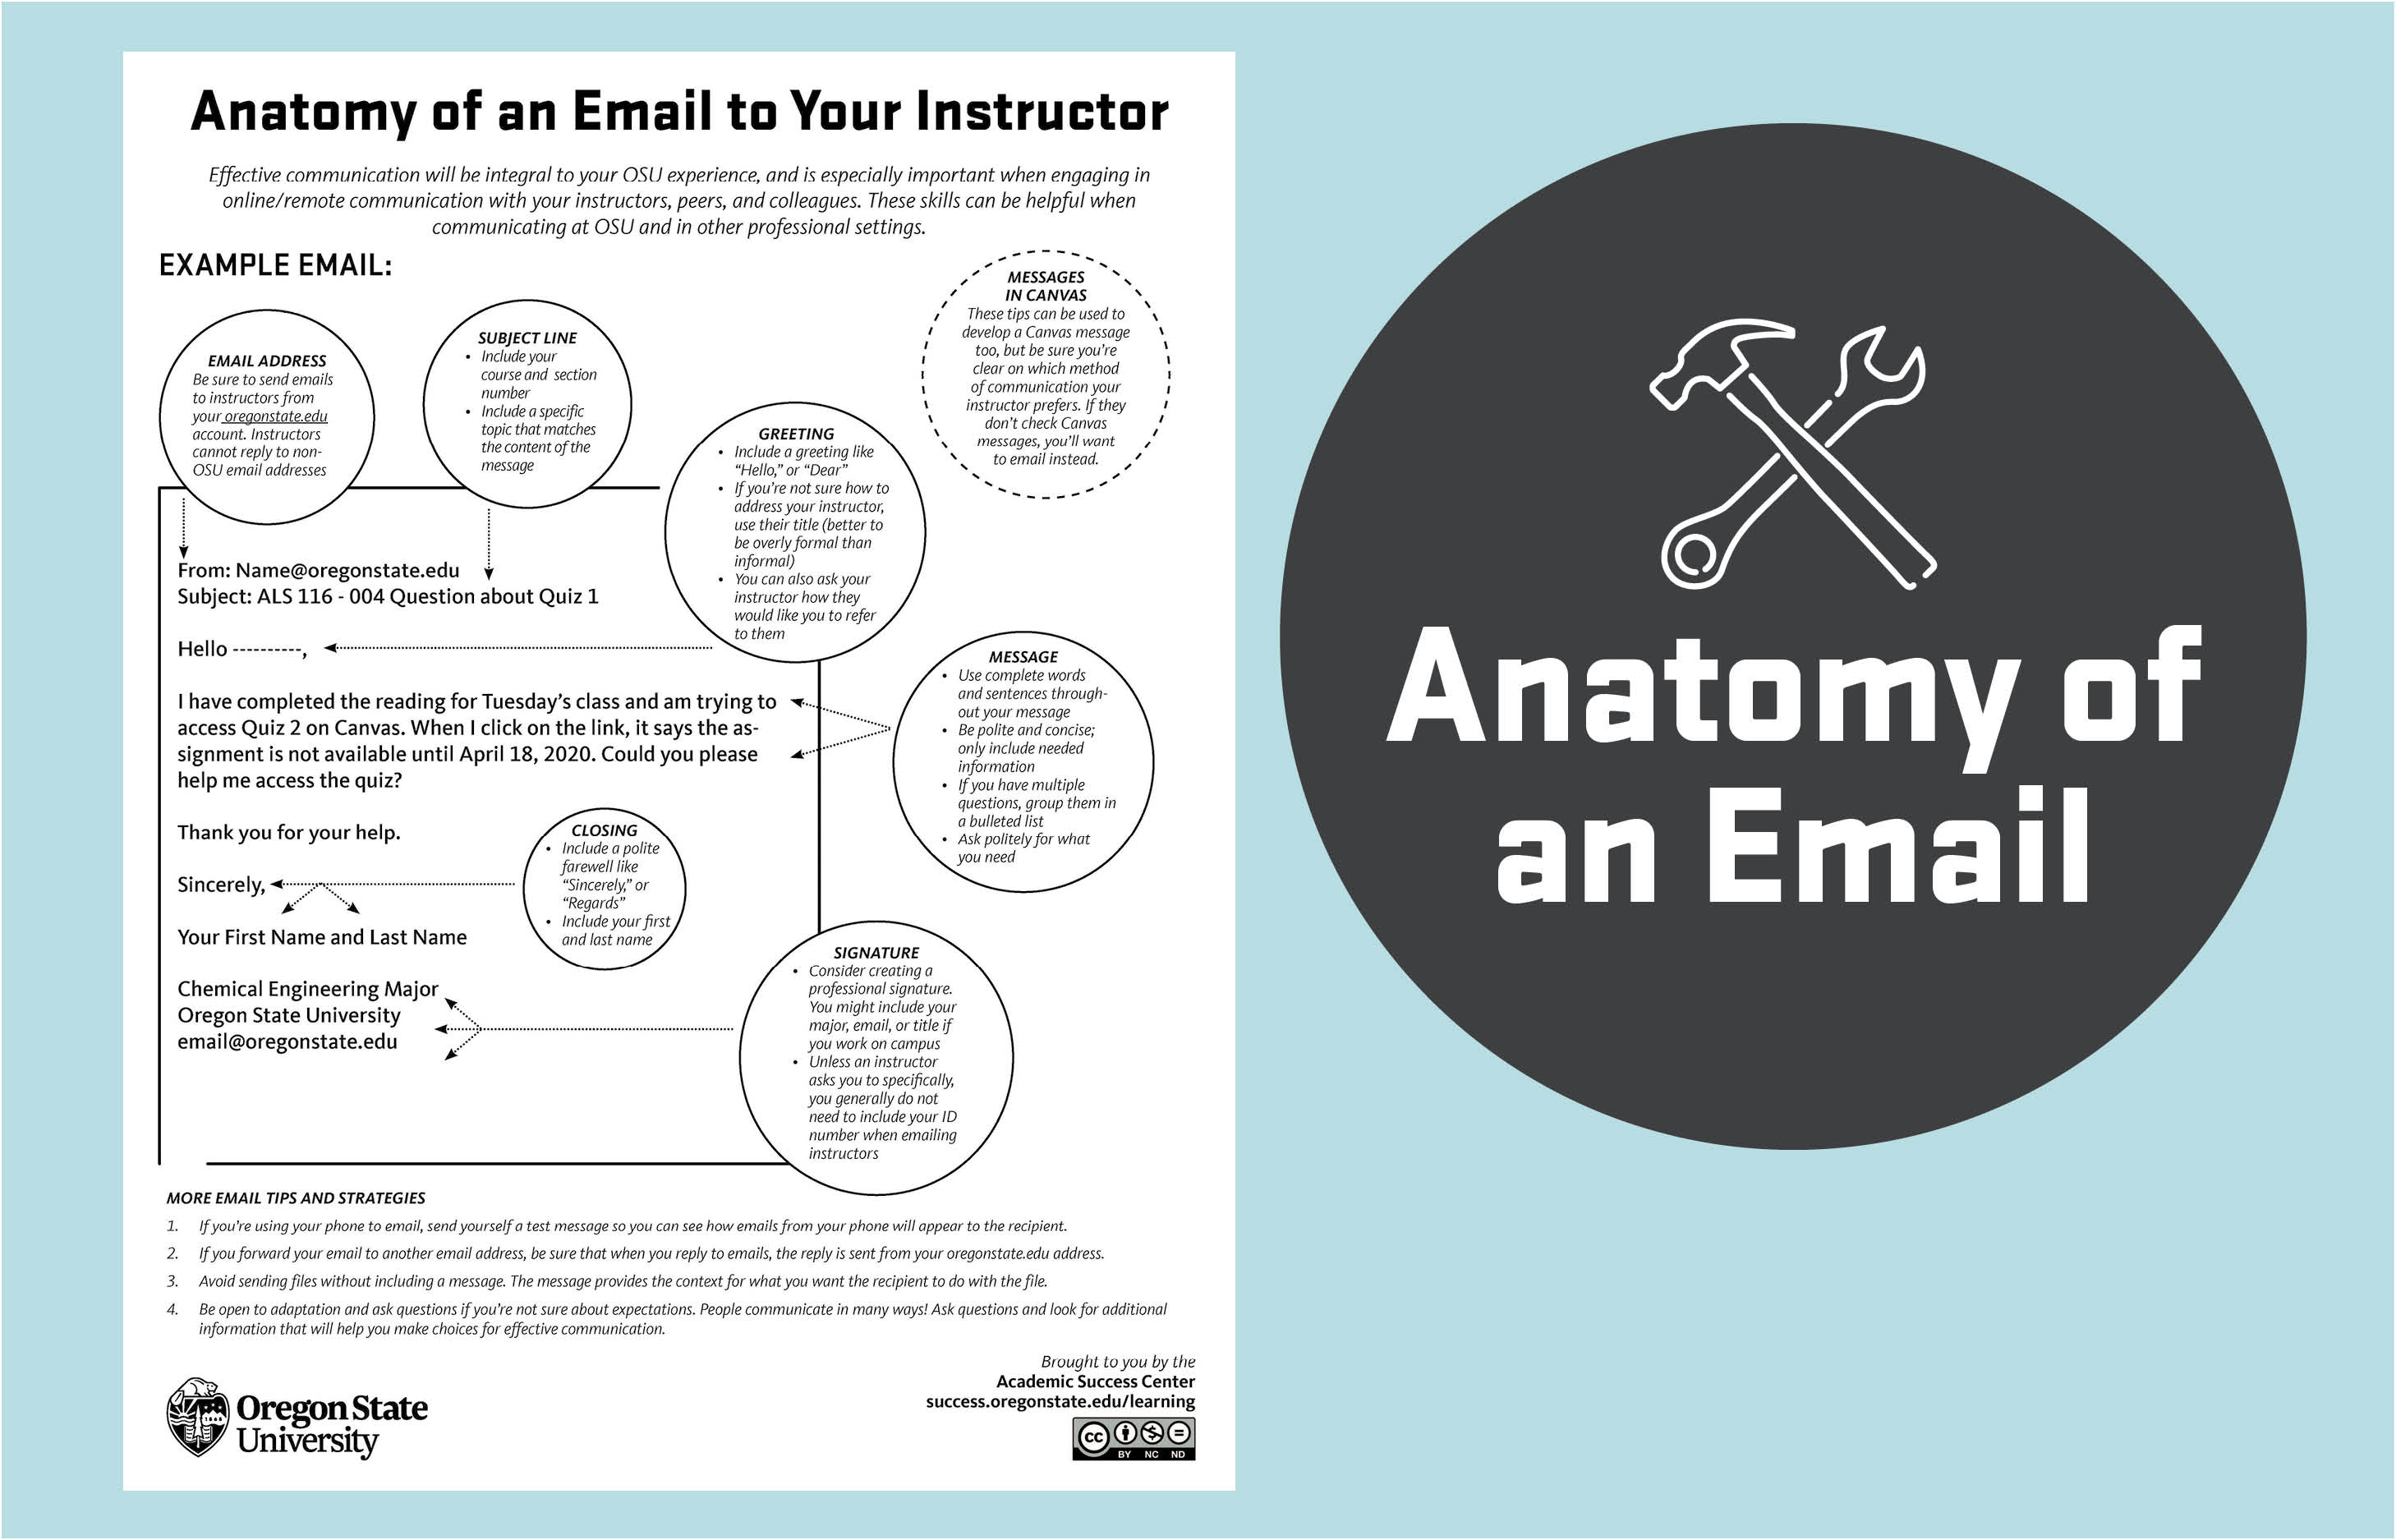 Anatomy of an Email to Your Instructor tool